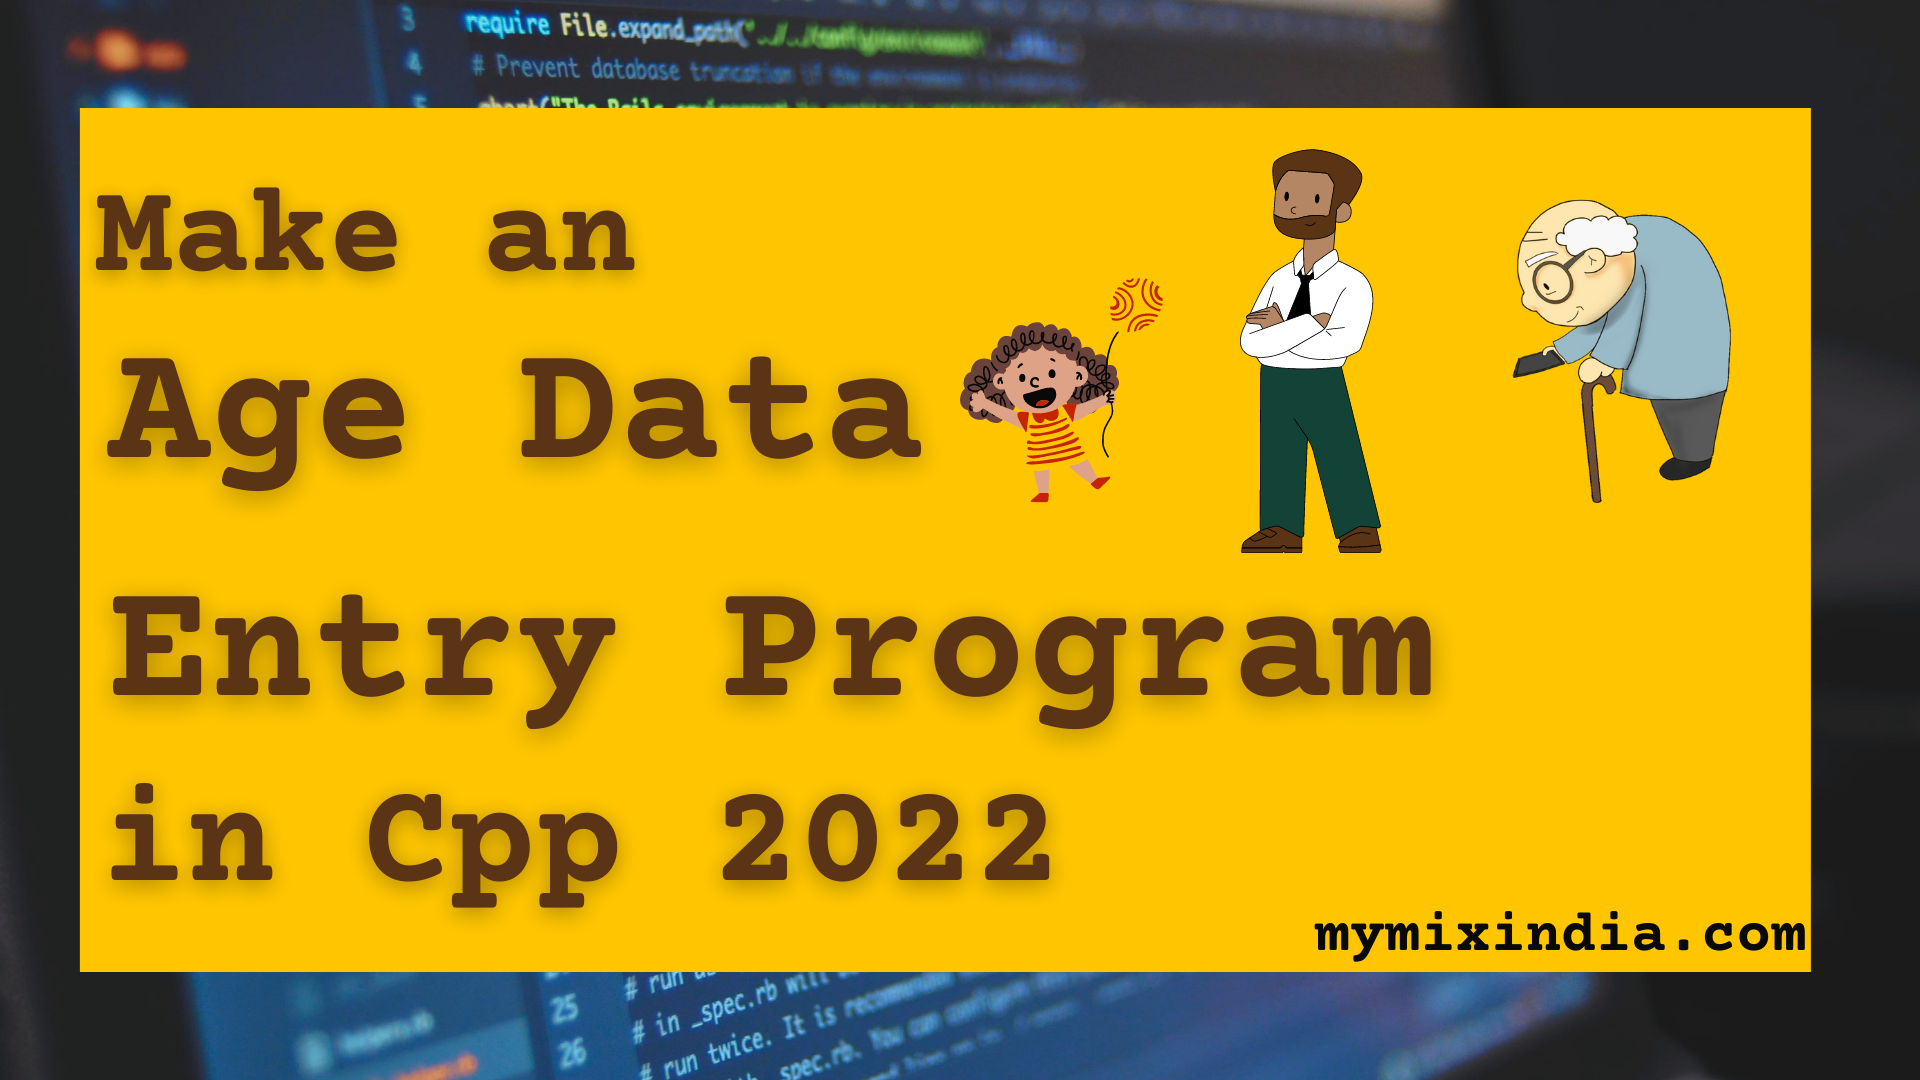 Make an Age Data Entry Program in Cpp 2022 - mymixindia.com